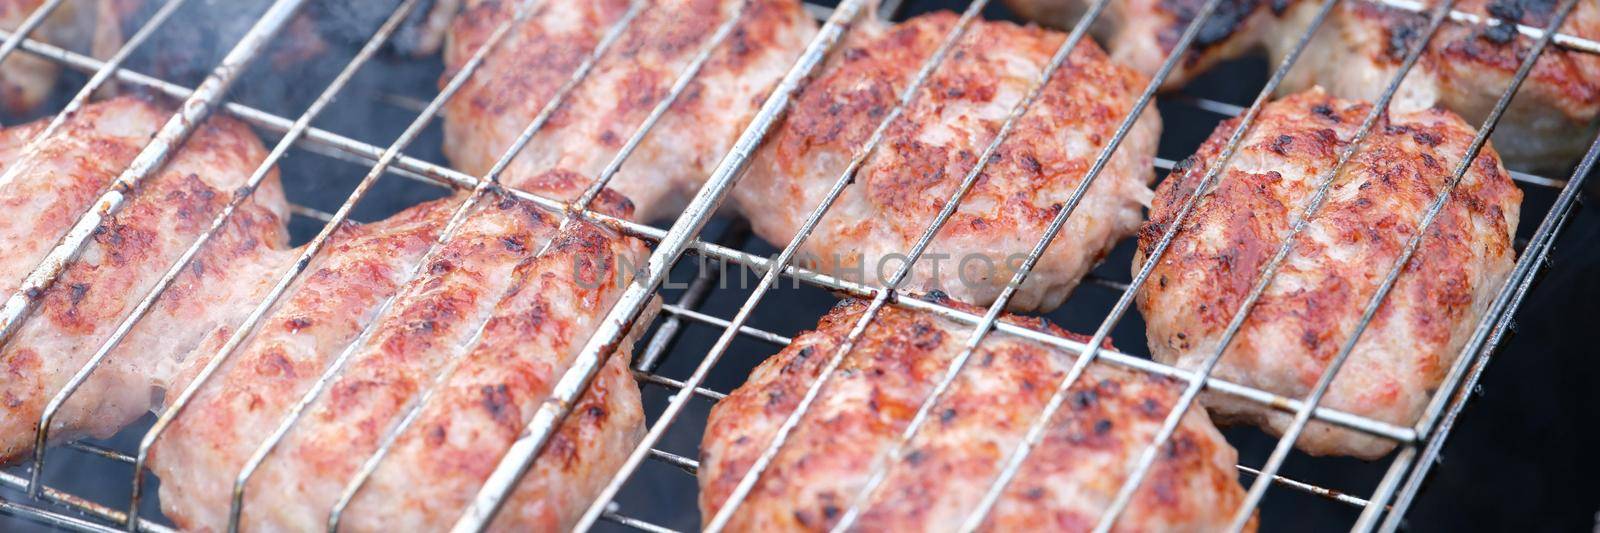 Meat cutlets are grilled on wire rack closeup by kuprevich